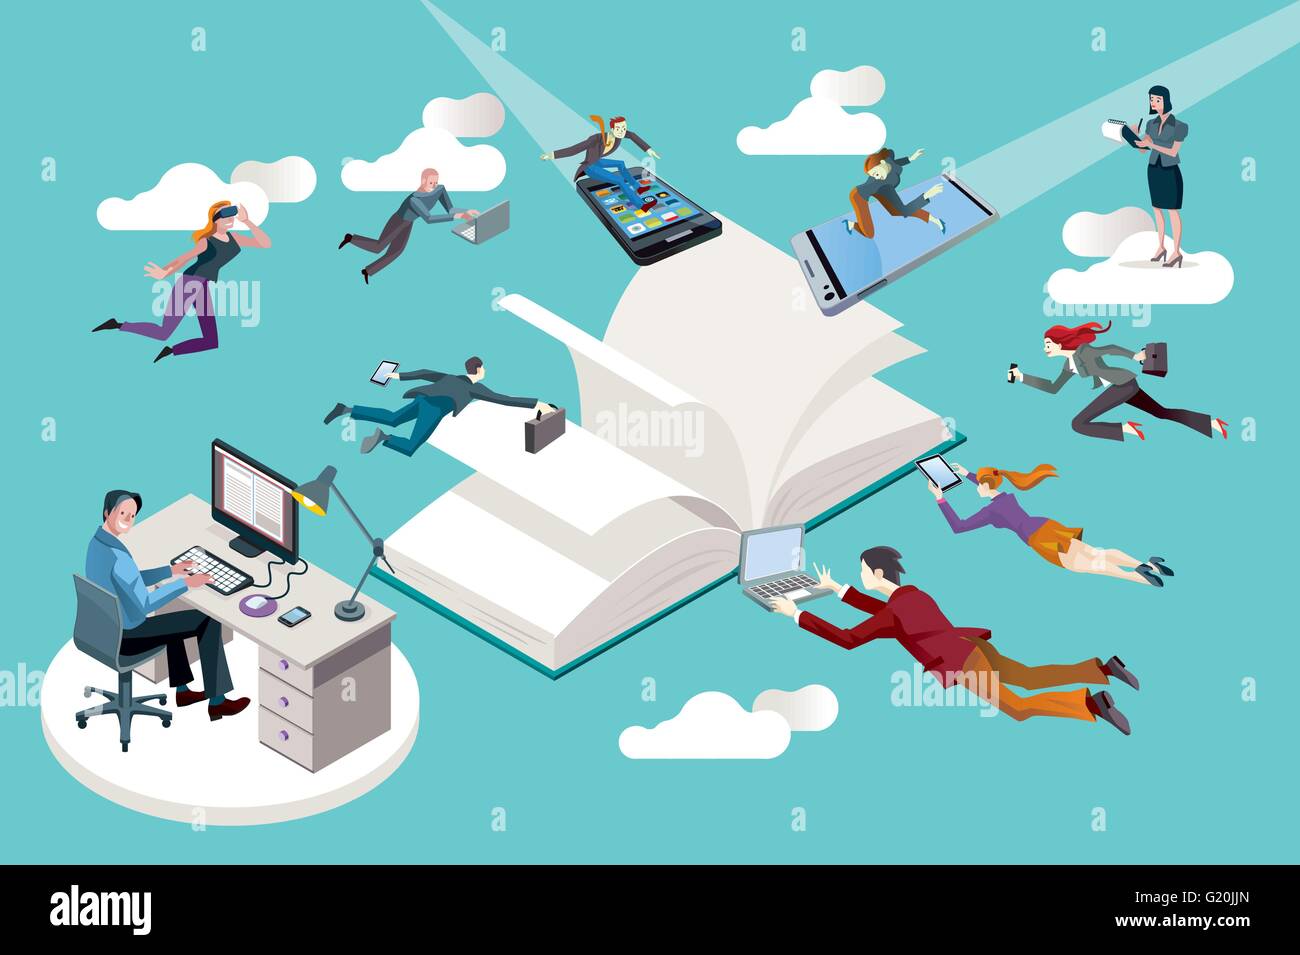 Publishing company staff flying toward an open book and working in it. Stock Vector